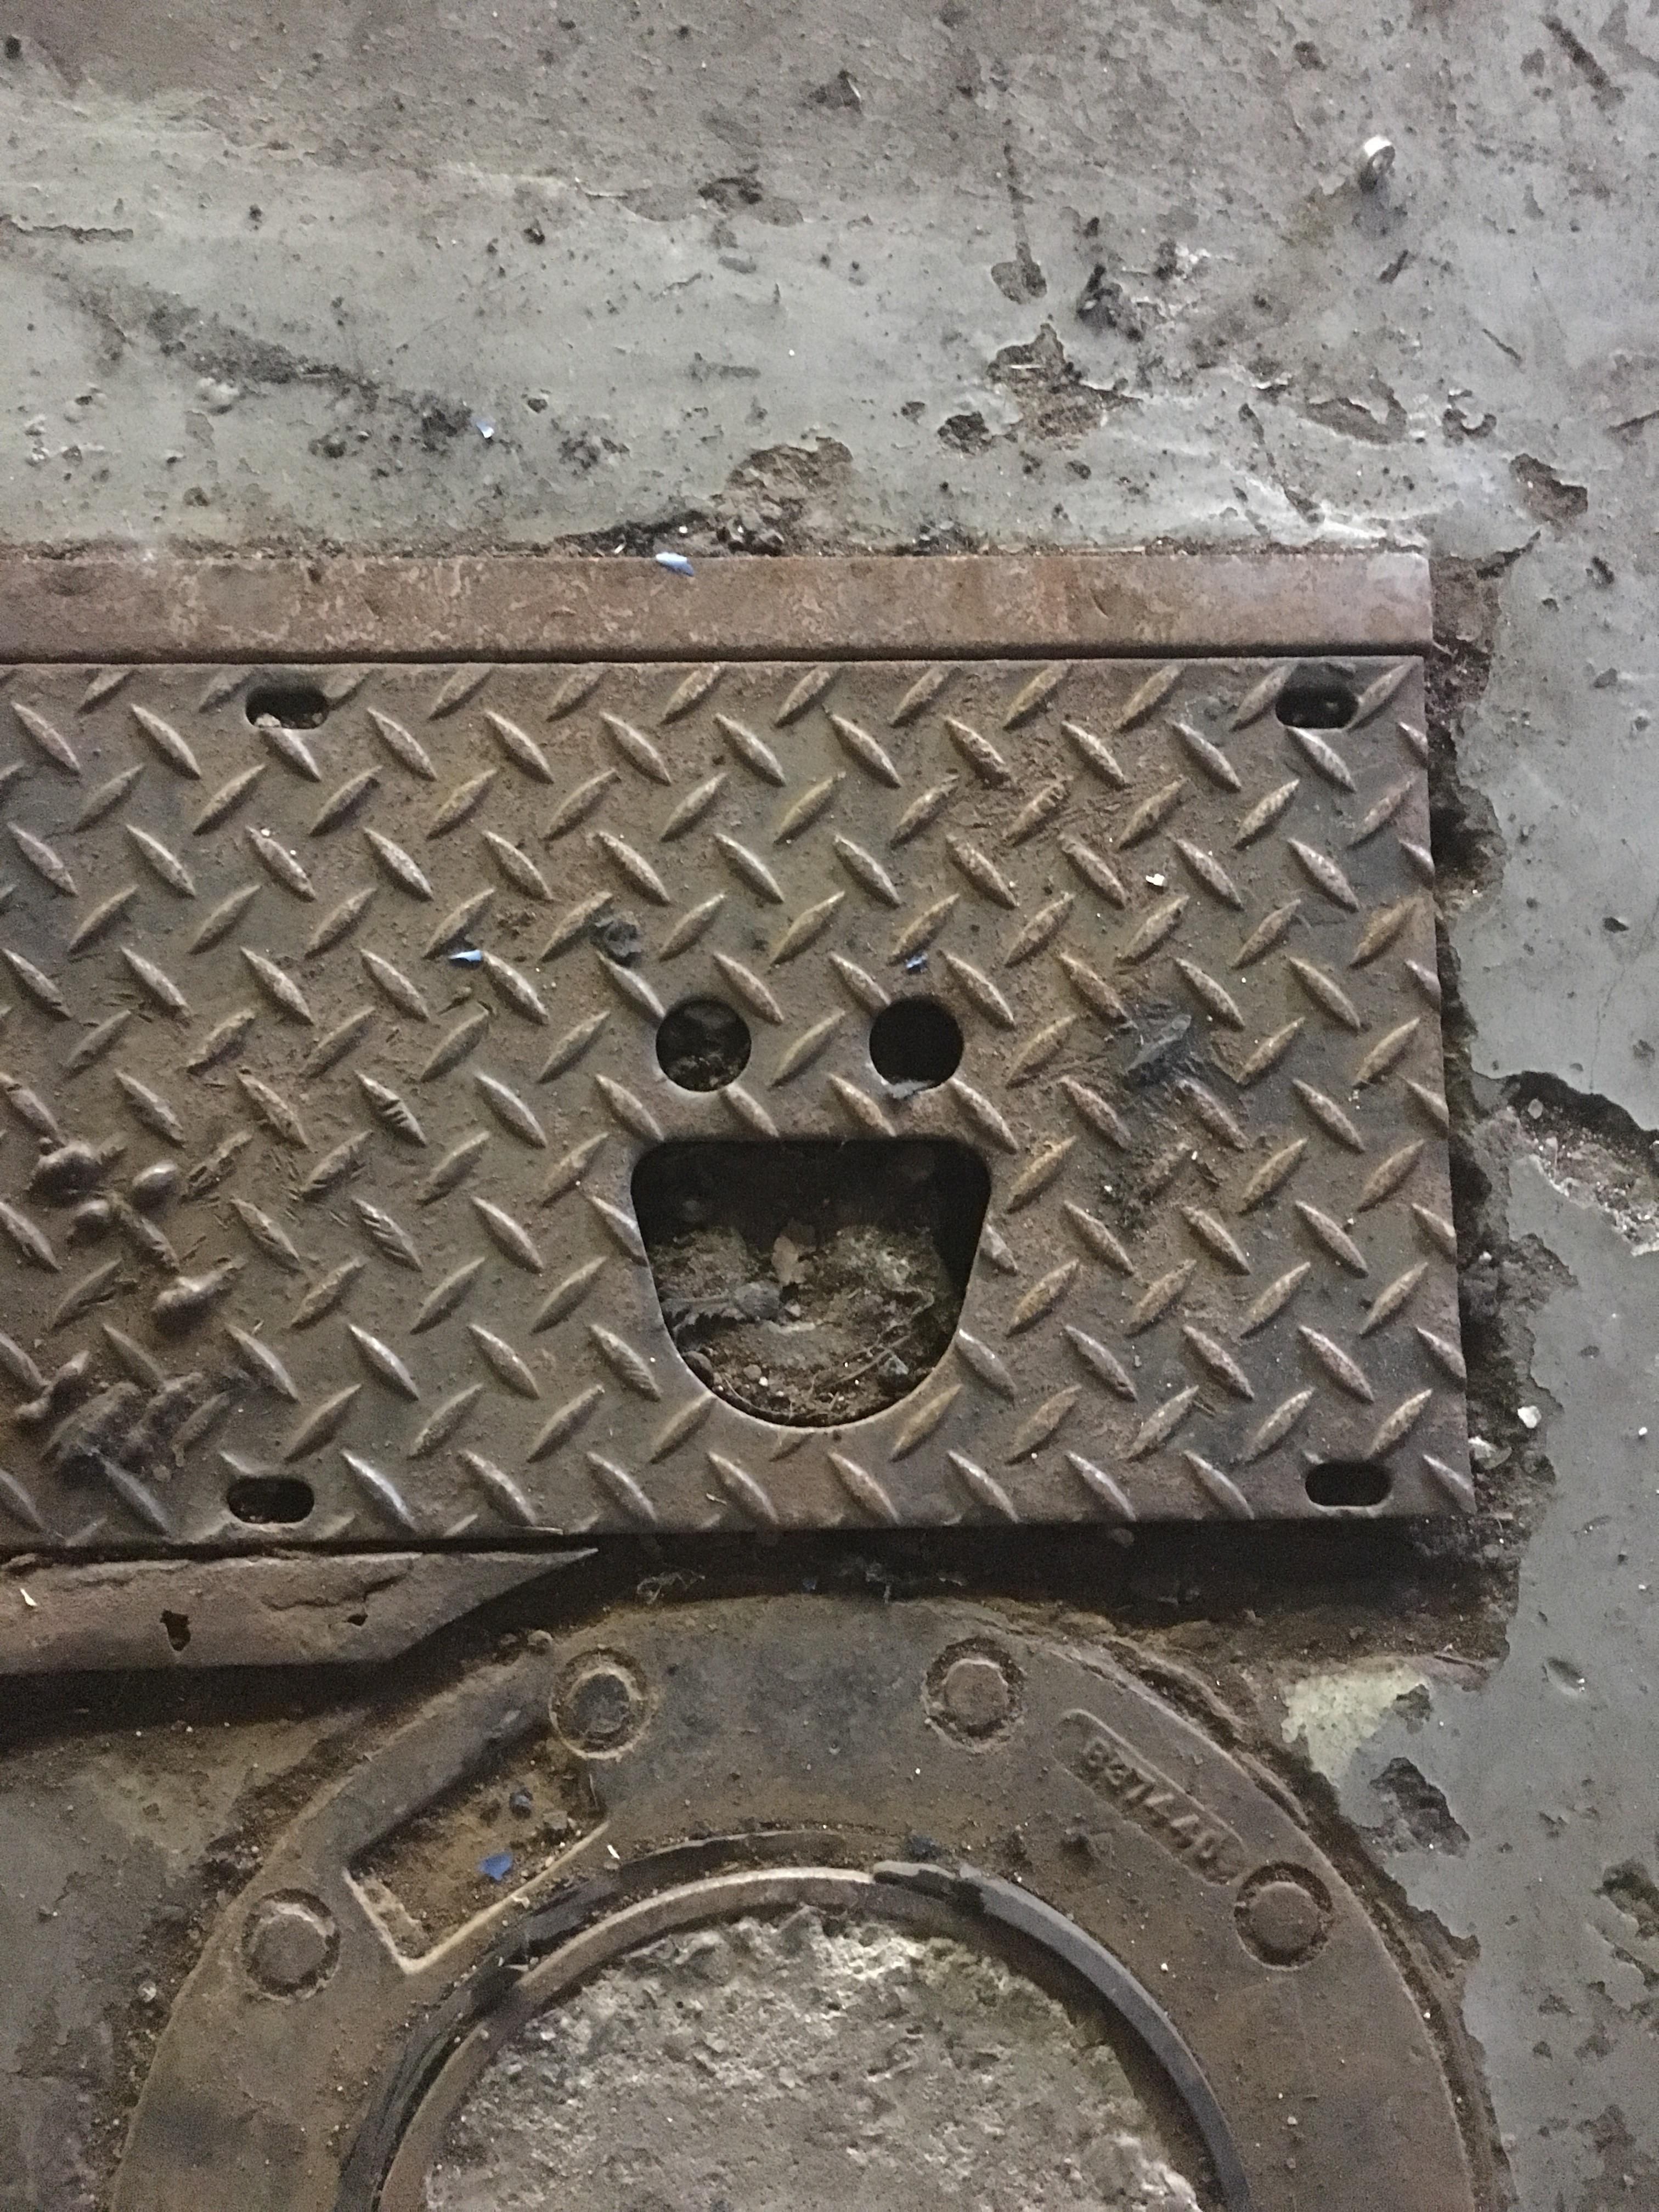 This steel grate is so happy it almost makes me wanna smile back at it